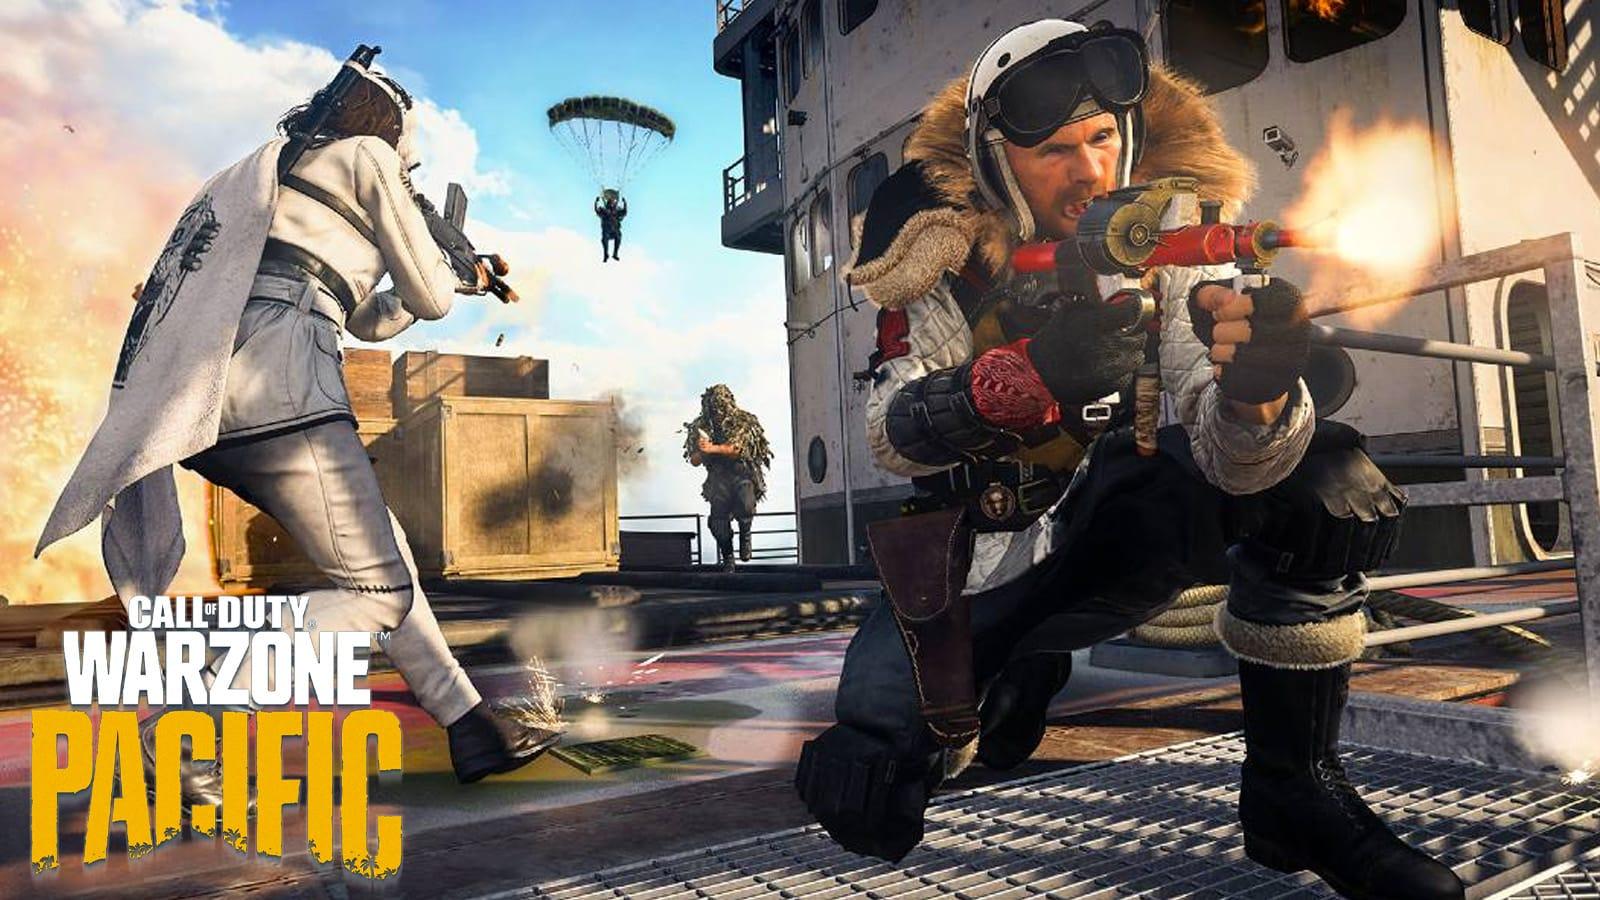 Tips and tricks to identify hackers in Call of Duty Mobile